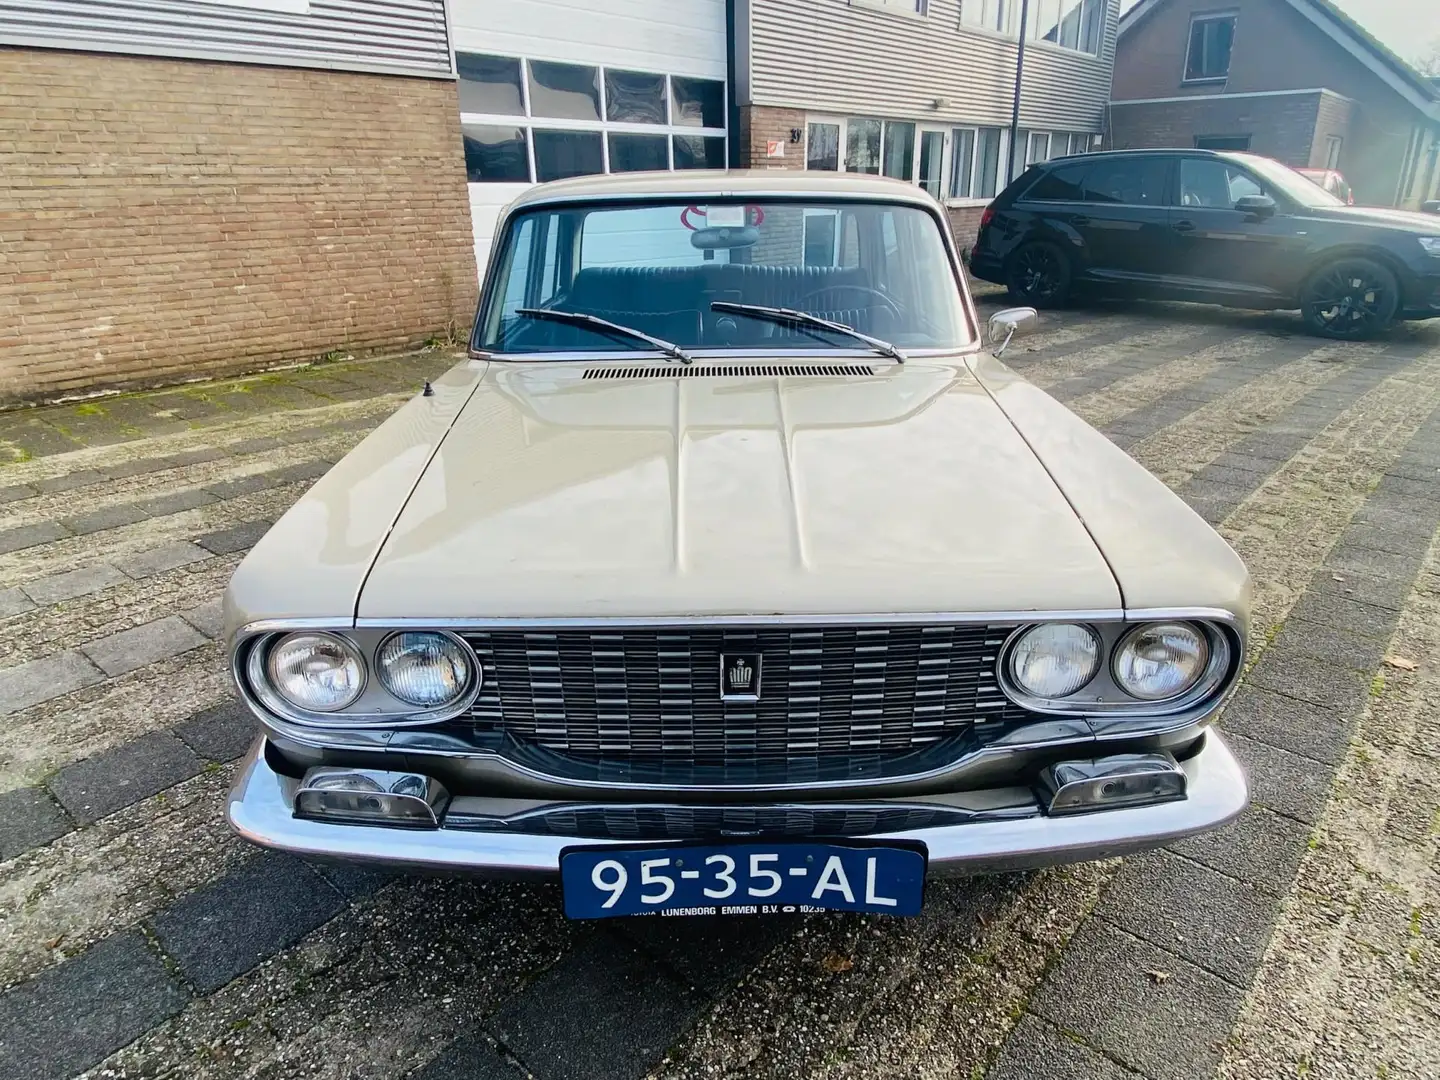 Toyota Crown RS 41 L 1965 opknapper Szary - 2